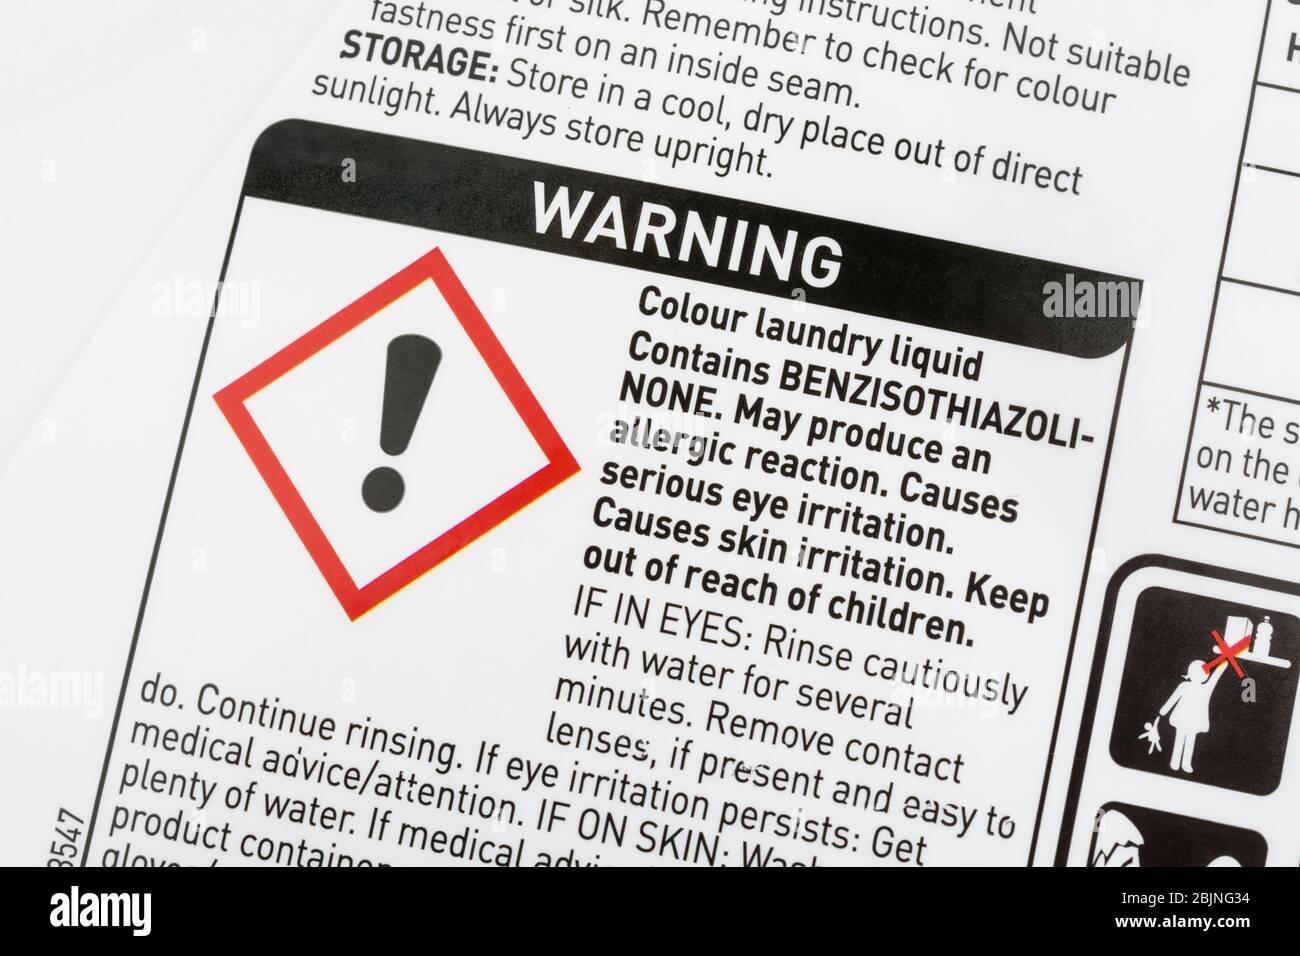 ASDA laundry soap liquid & Exclamation mark hazard symbol for skin, eye or respiratory tract irritant on warning label. Dangerous household products. Stock Photo